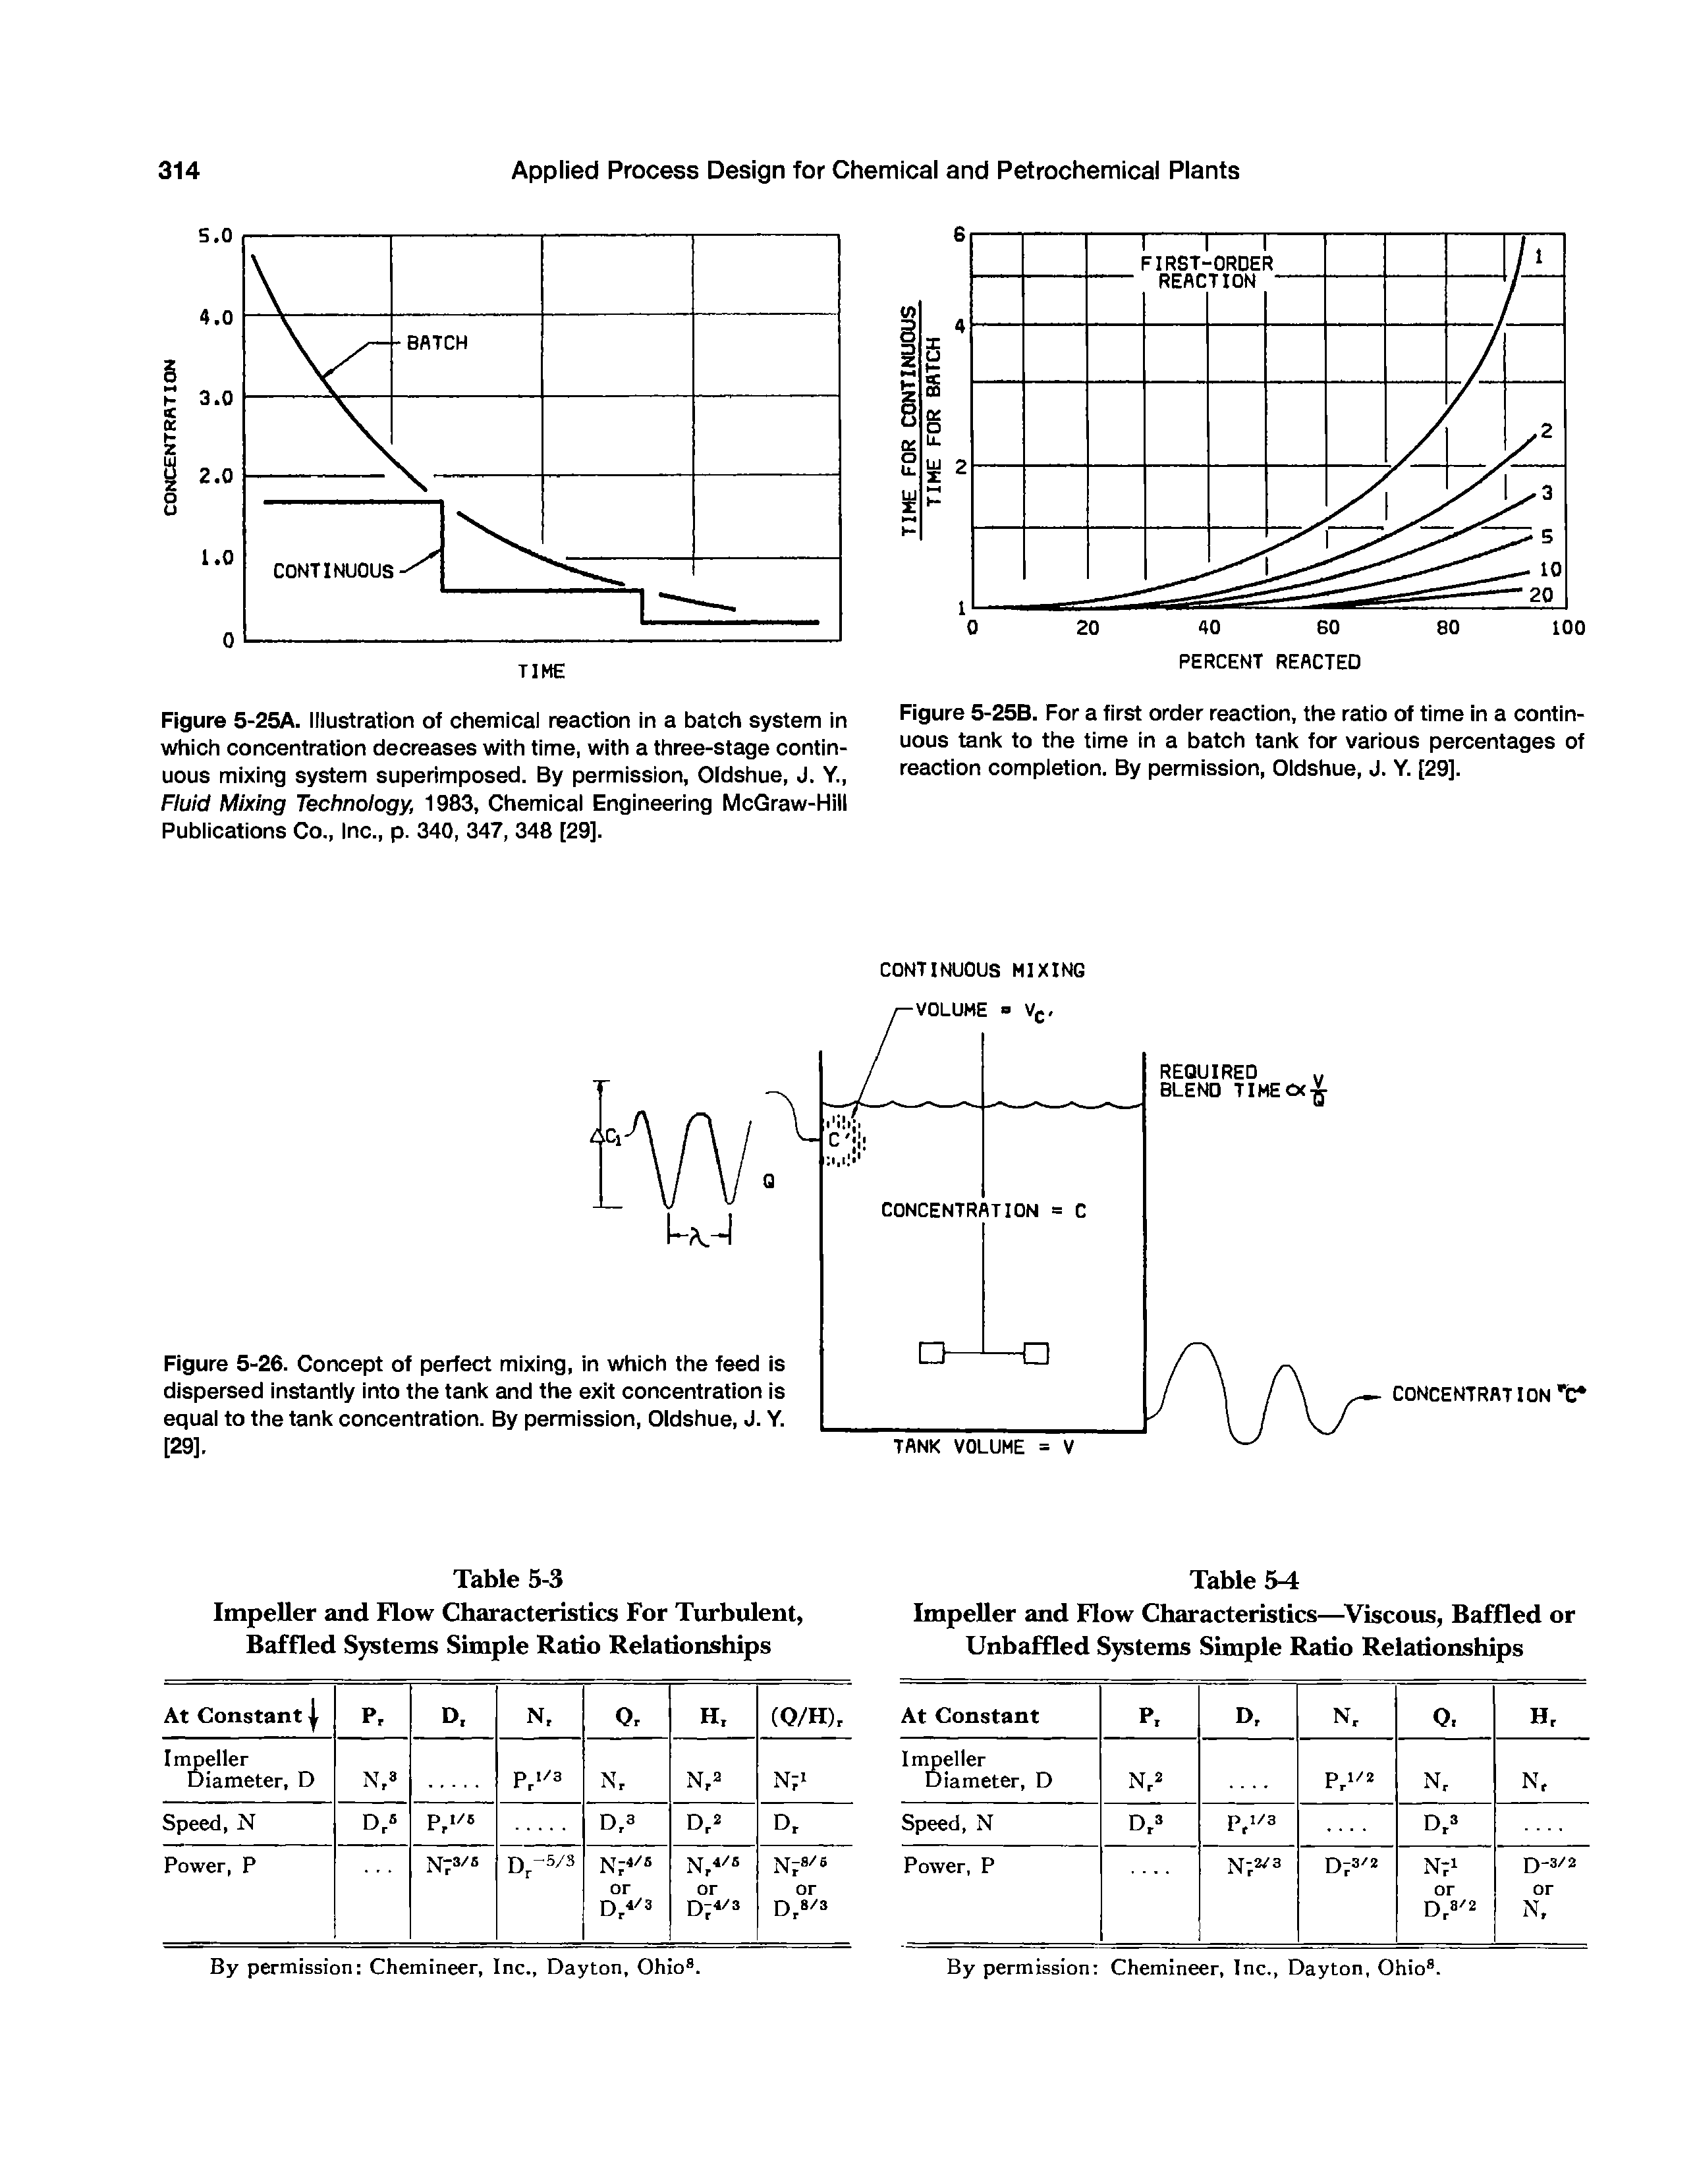 Figure 5-25A. Illustration of chemical reaction in a batch system in which concentration decreases with time, with a three-stage continuous mixing system superimposed. By permission, Oidshue, J. Y., Fluid Mixing Technology, 1983, Chemical Engineering McGraw-Hill Publications Co., Inc., p. 340, 347, 348 [29].